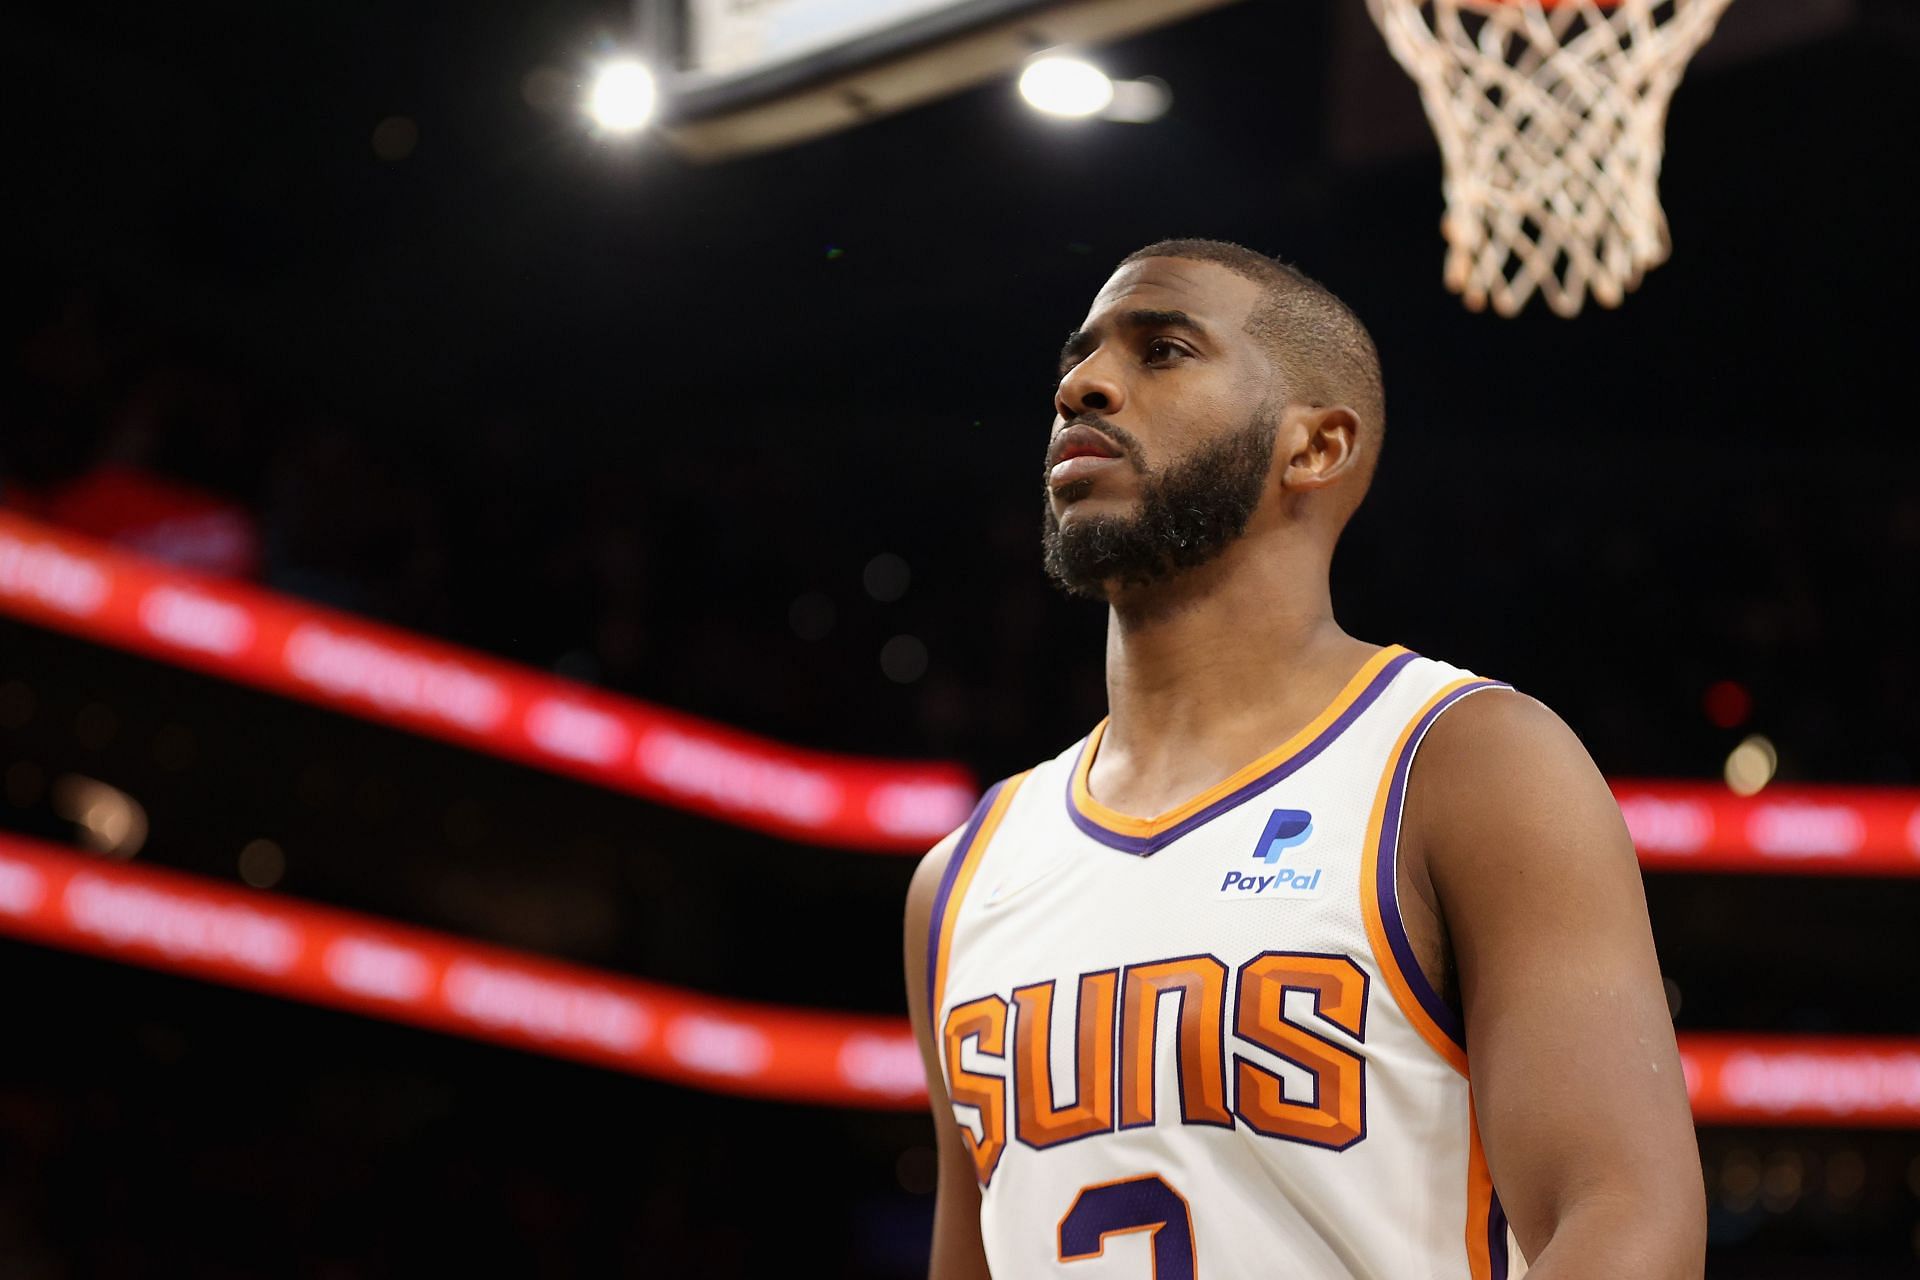 Phoenix Suns superstar Chris Paul put in another solid shift in their win against Cavs